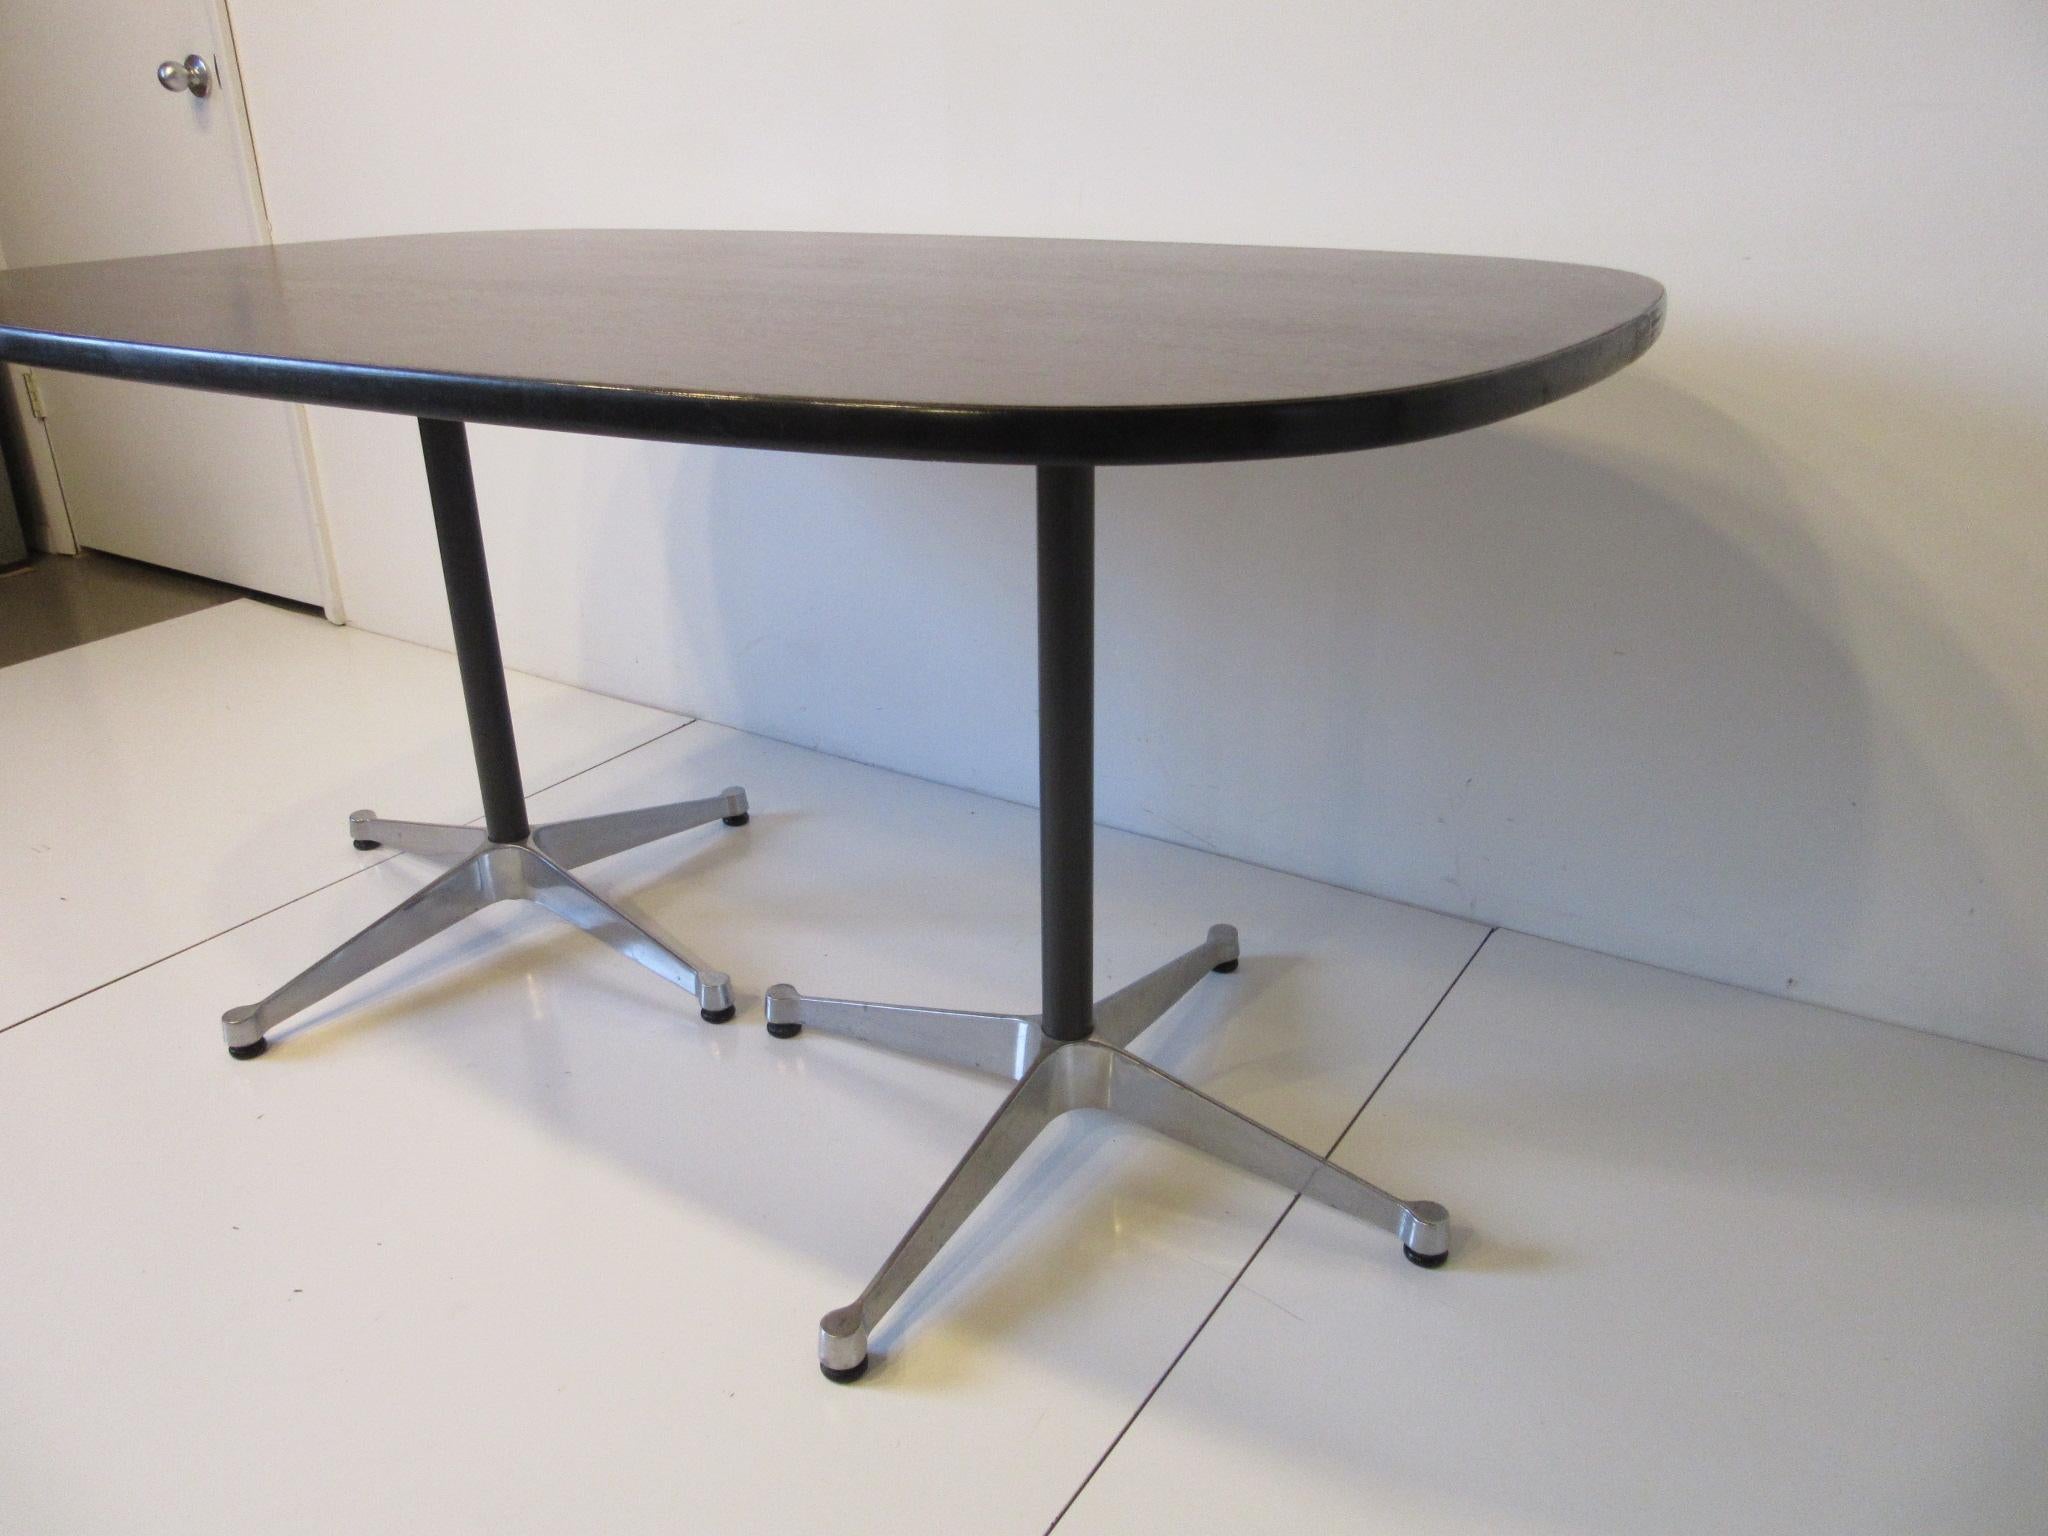 A nice sized medium ebony toned dining table with satin black edge having black pedestals attached to cast aluminum star bases with adjustable foot pads. Retains the labels designed by Ray and Charlies Eames for the Aluminum Group Collection